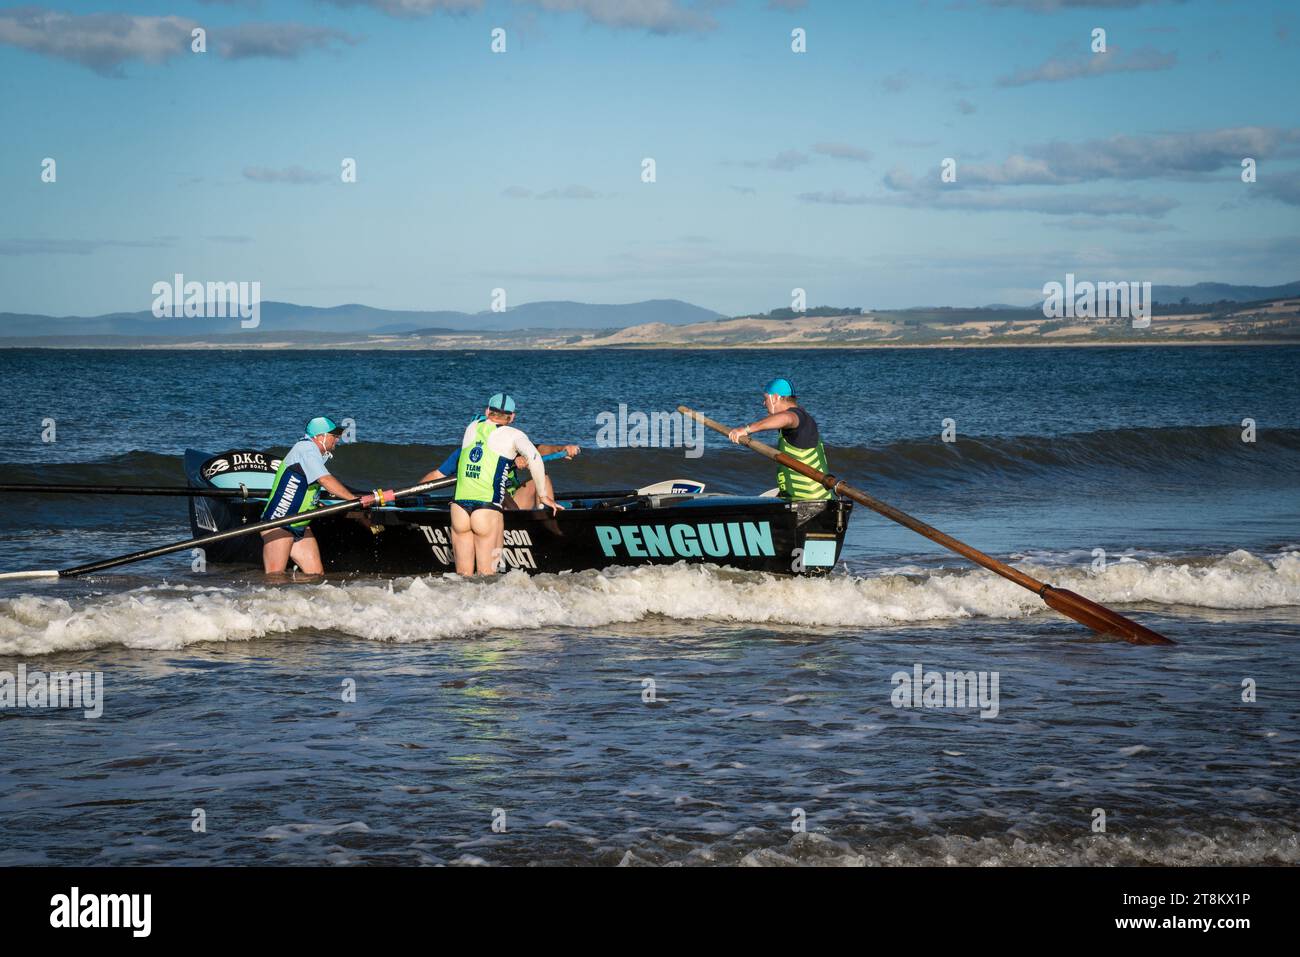 Competitors at a surf carnival prepare to enter the water at Devonport Beach Tasmania. Stock Photo